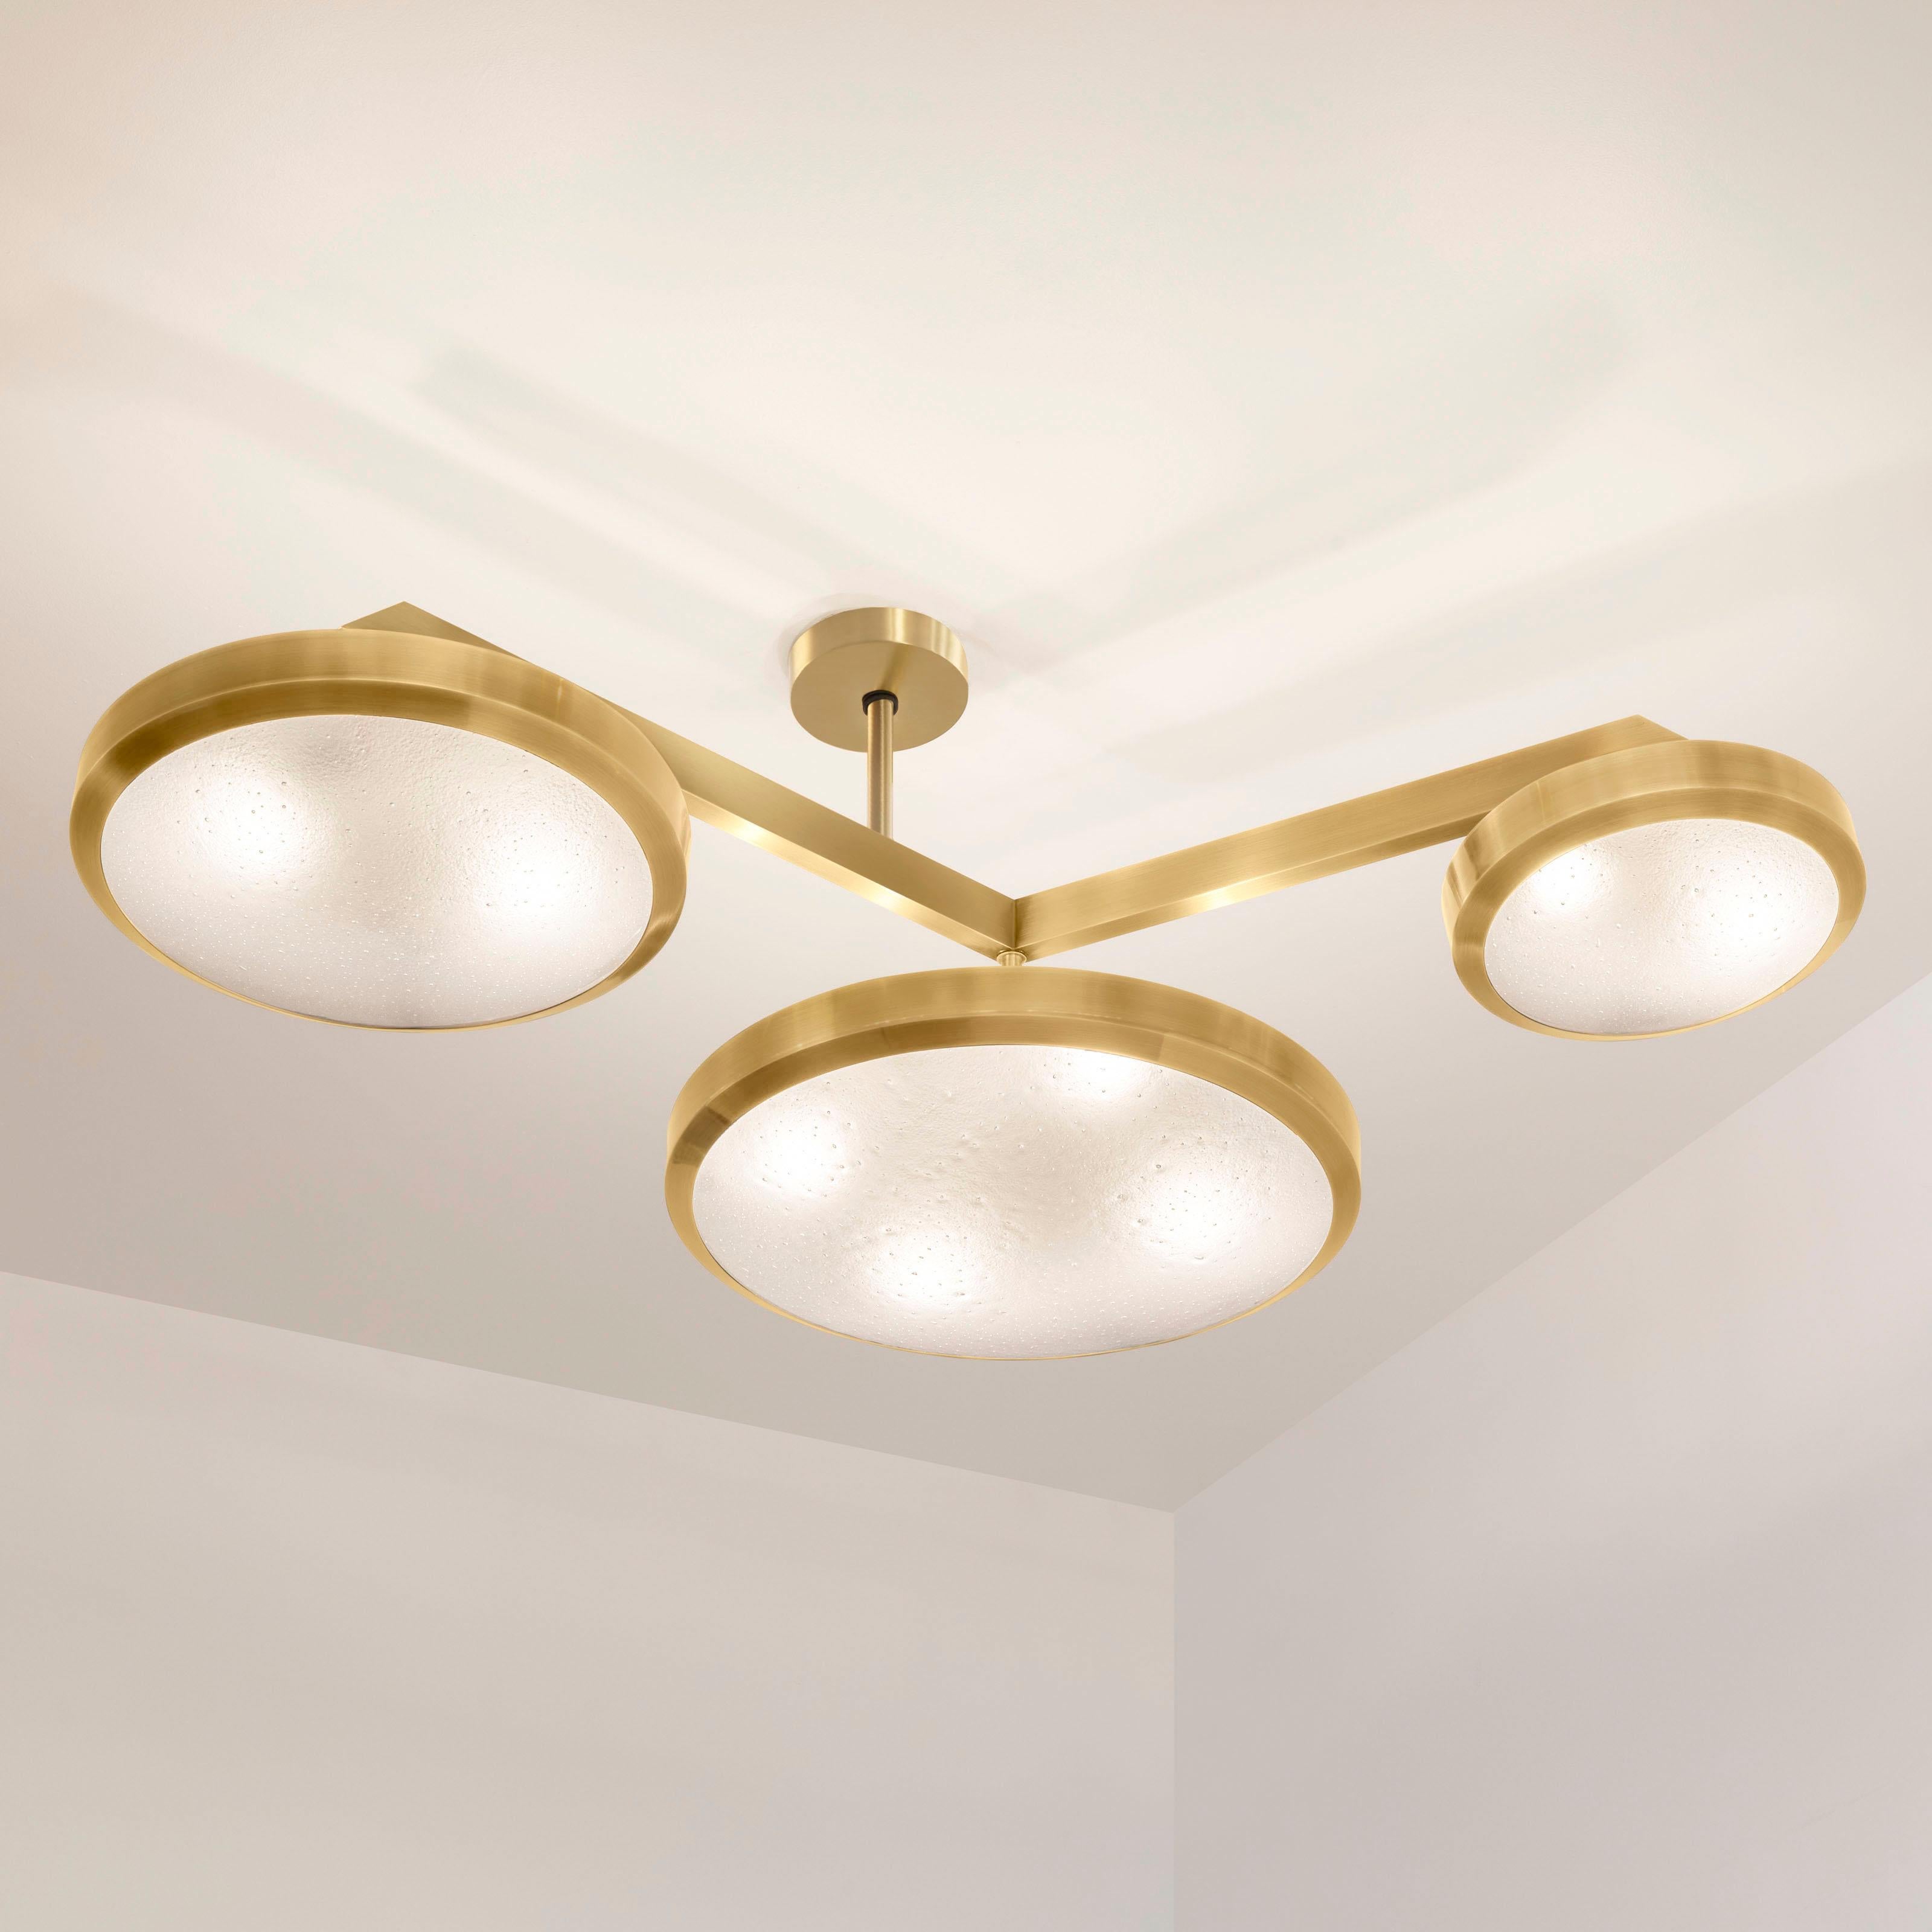 Italian Zeta Ceiling Light by Gaspare Asaro-Polished Nickel Finish For Sale